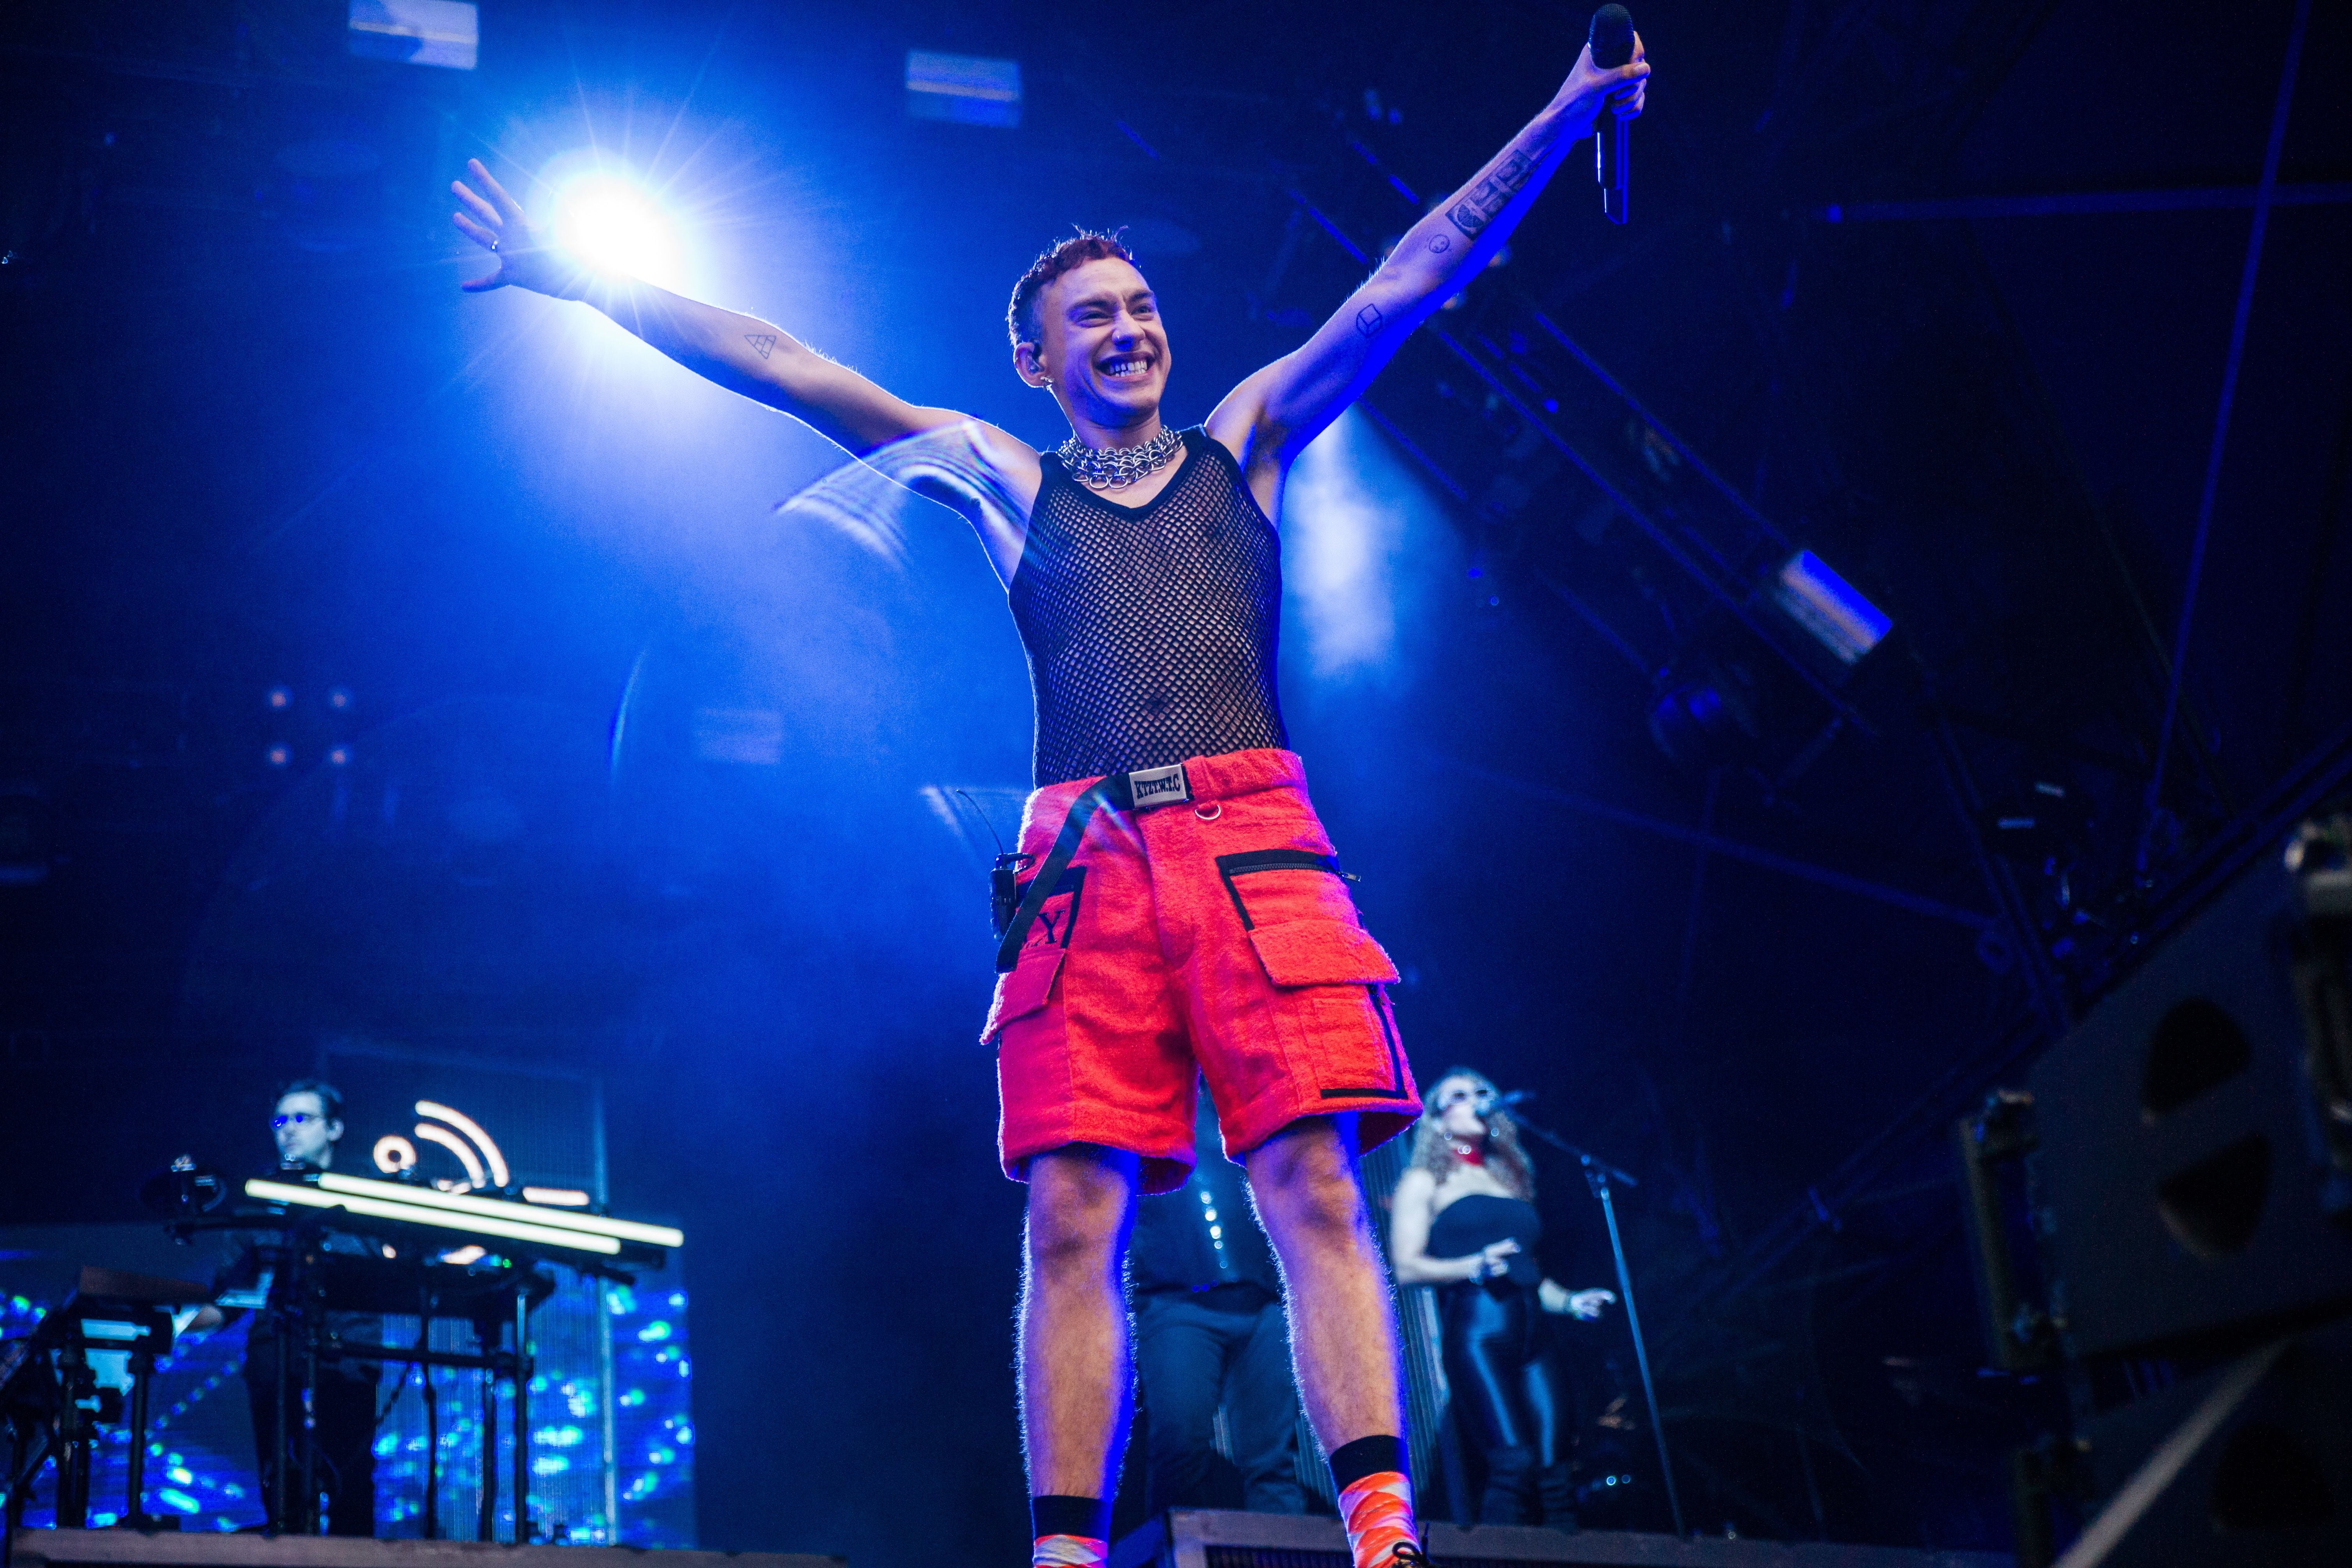 Alexander on stage with Years & Years